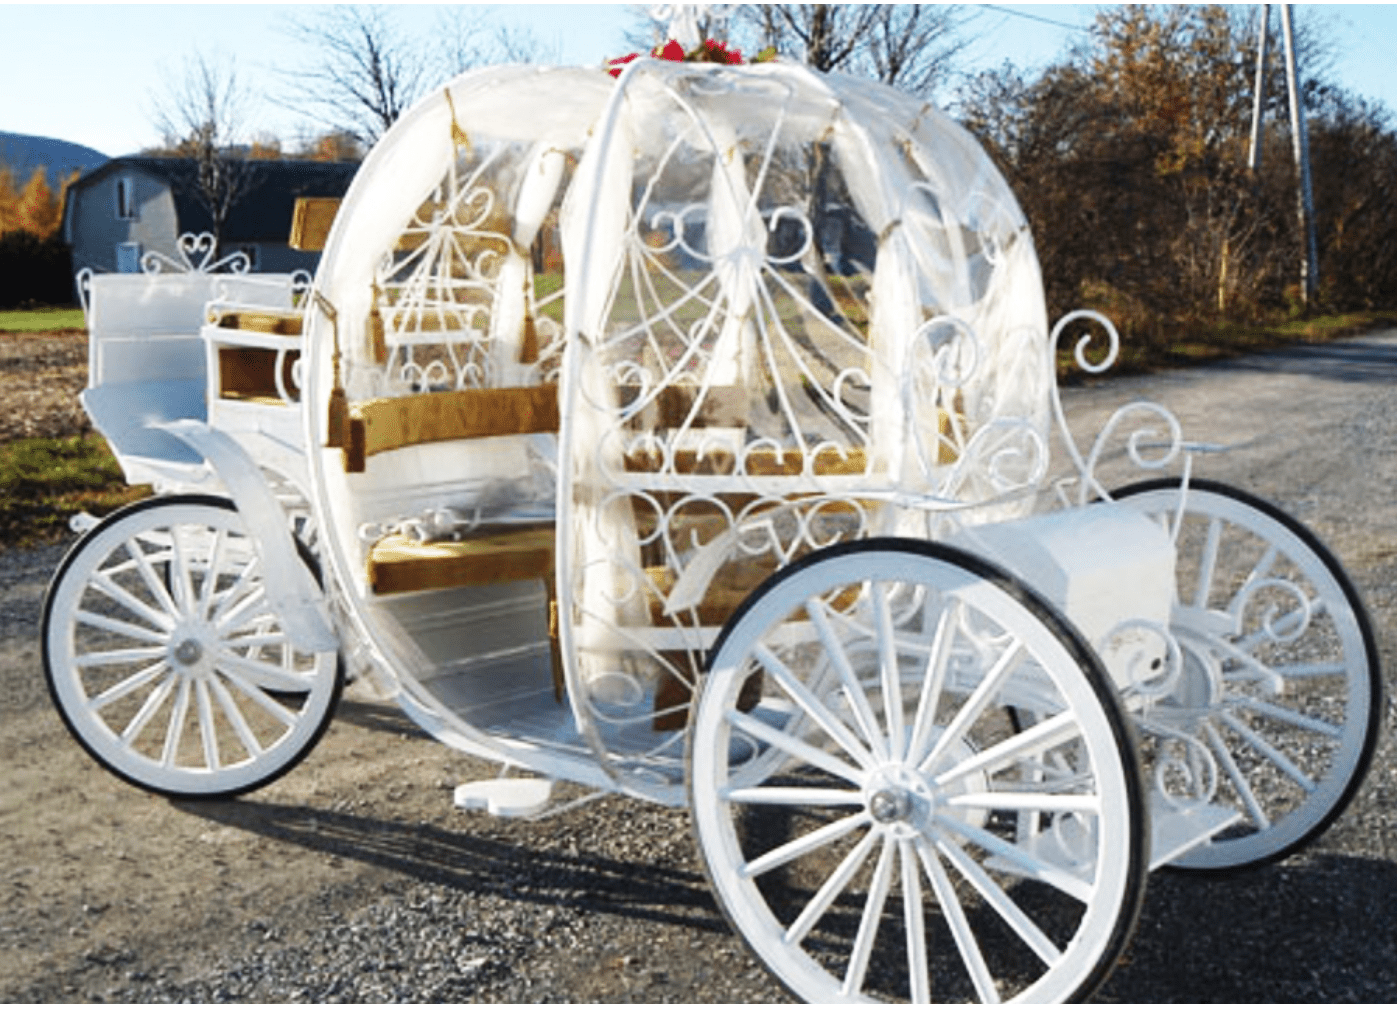 Solvang Council Defers Decision on Allowing Second Horse-Drawn Carriage Company